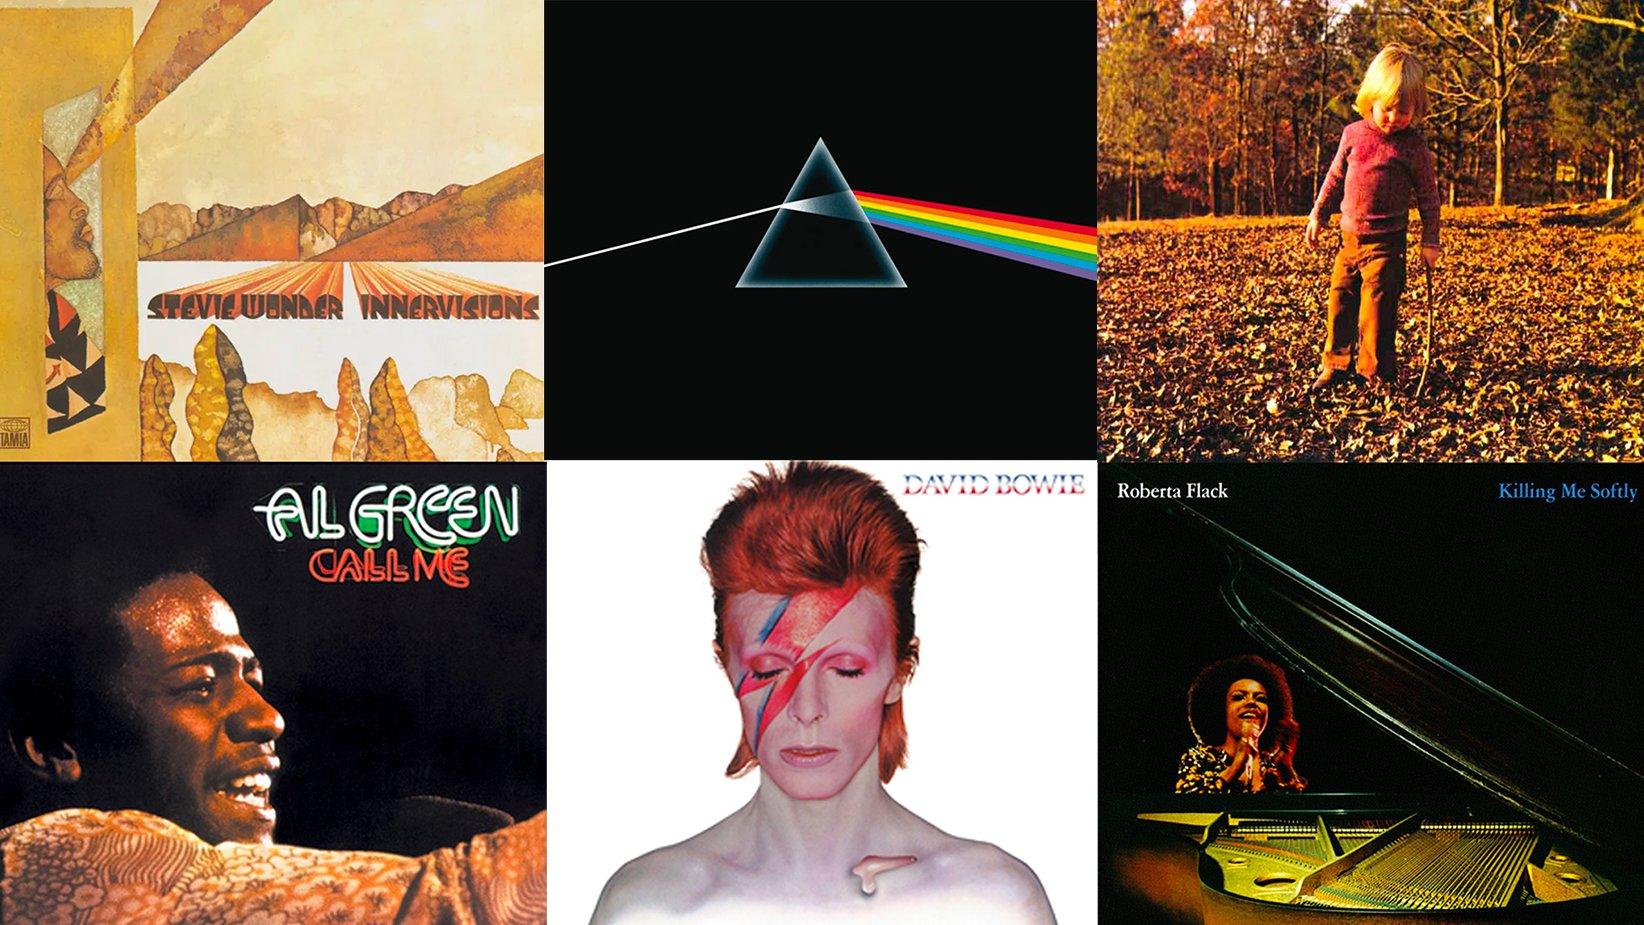 Albums covers of Stevie Wonder 'Inversions', Pink Floyd 'Dark Side of the Moon', the Allman Brothers Band 'Brothers and Sisters', Al Green 'Call me', David Bowie 'Alladin Sane' and Roberta Flack 'Killing Me Softly'